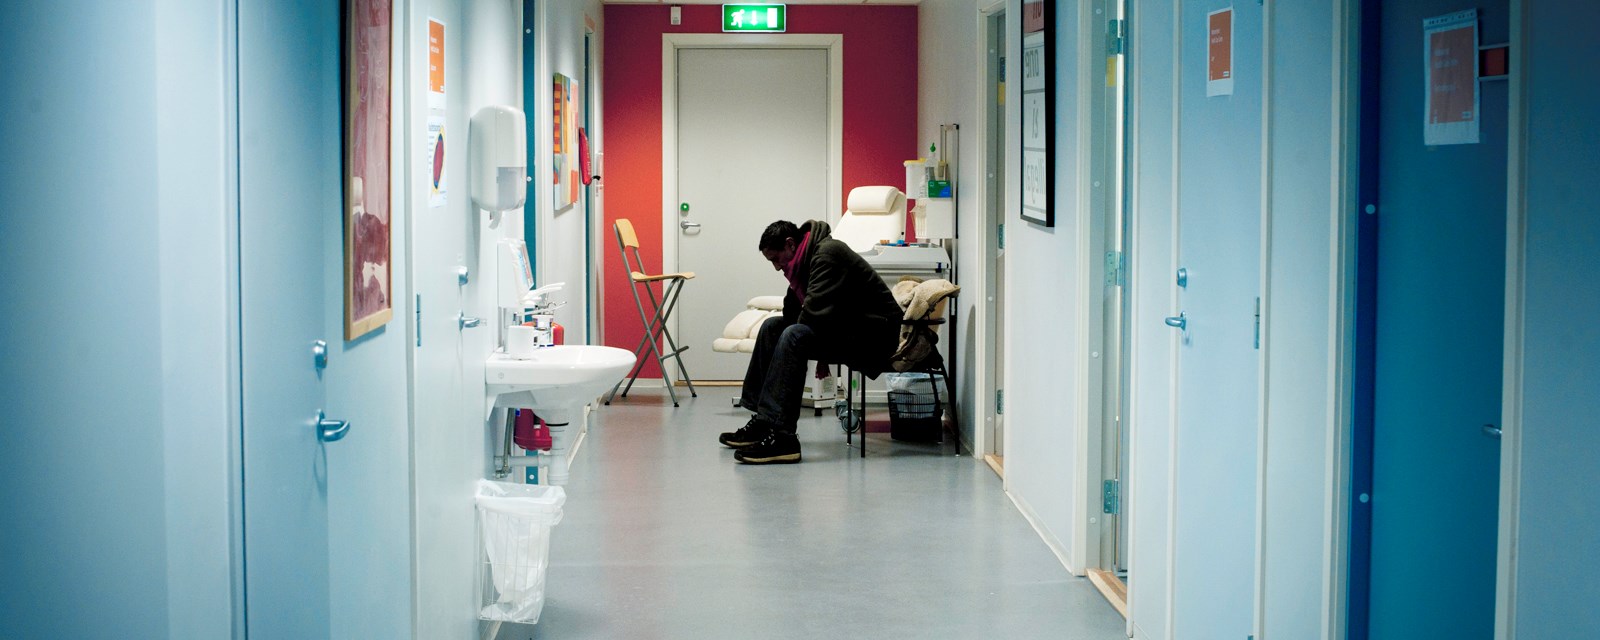 A man is waiting in the hallway in a hospital